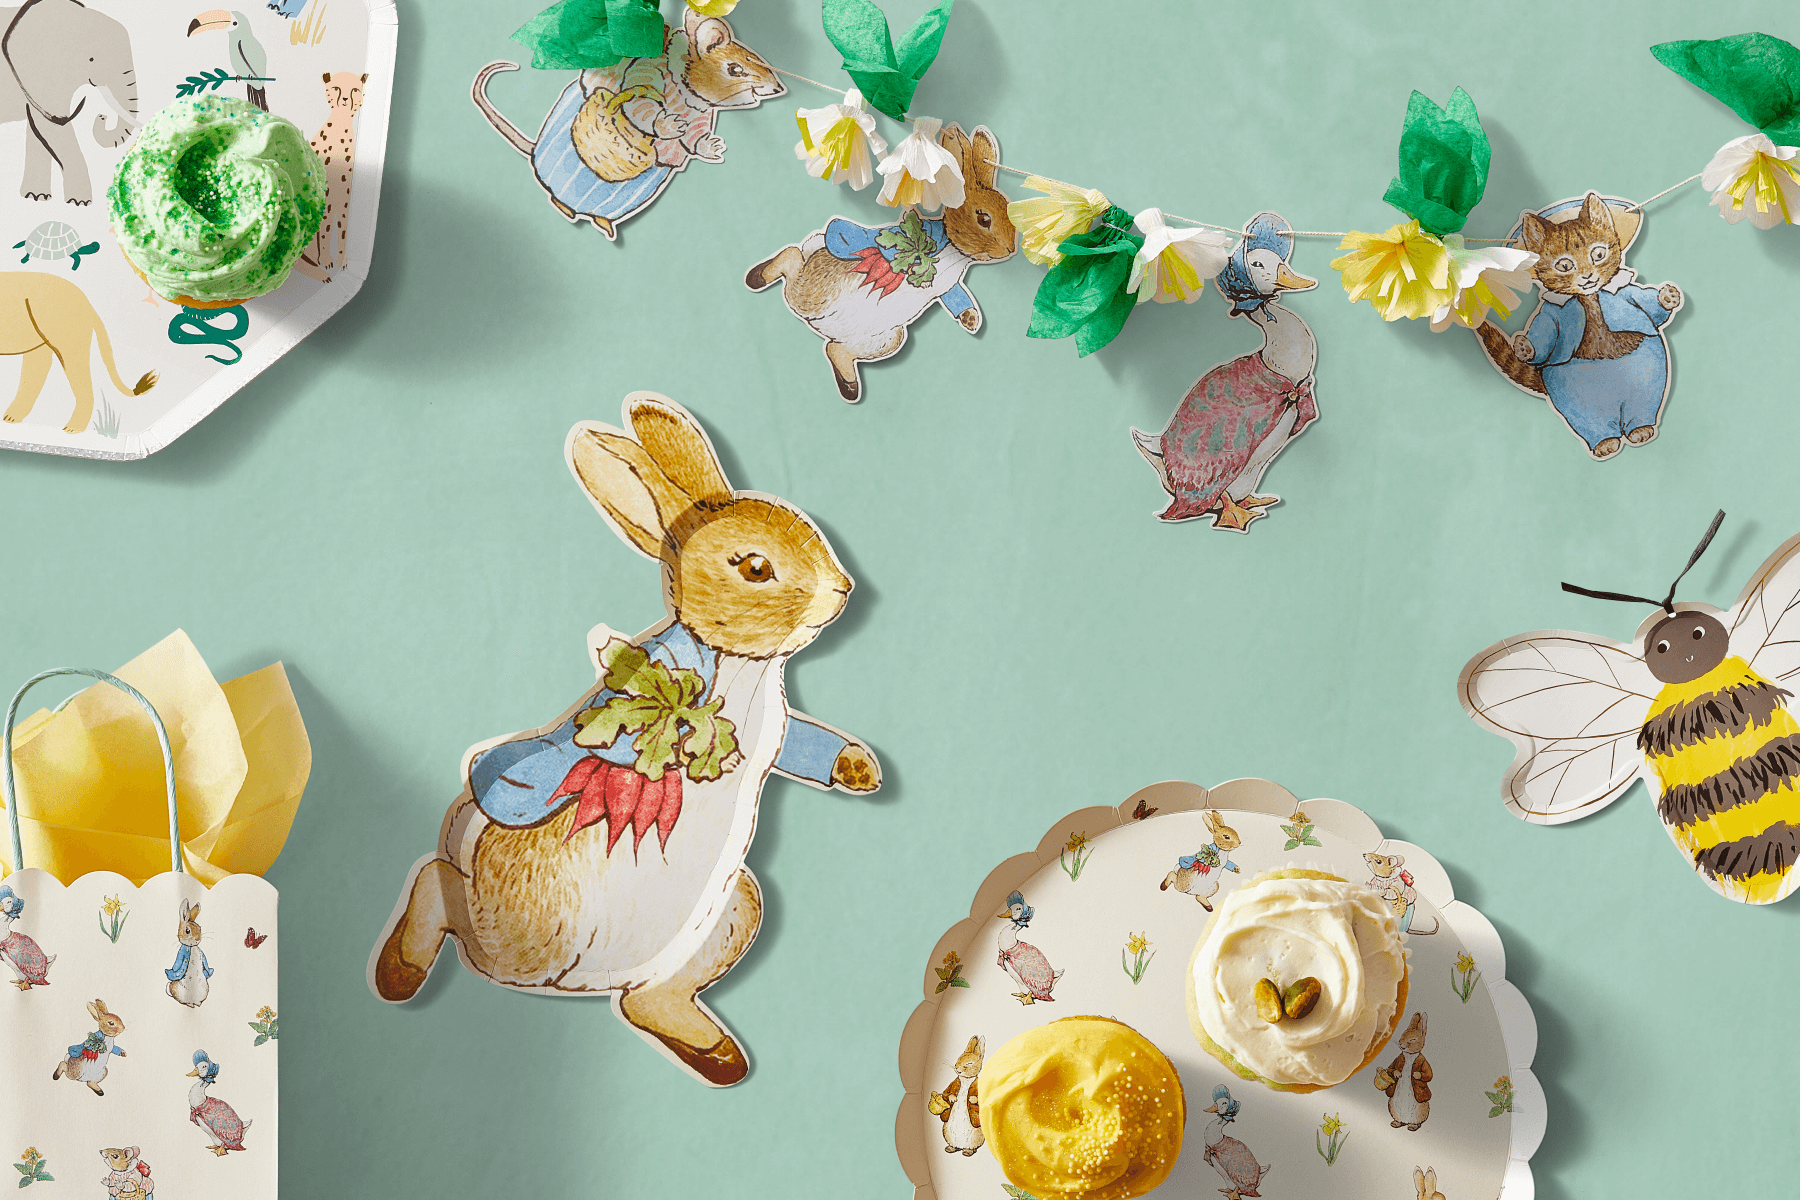 Peter Rabbit-themed party plates and banners.